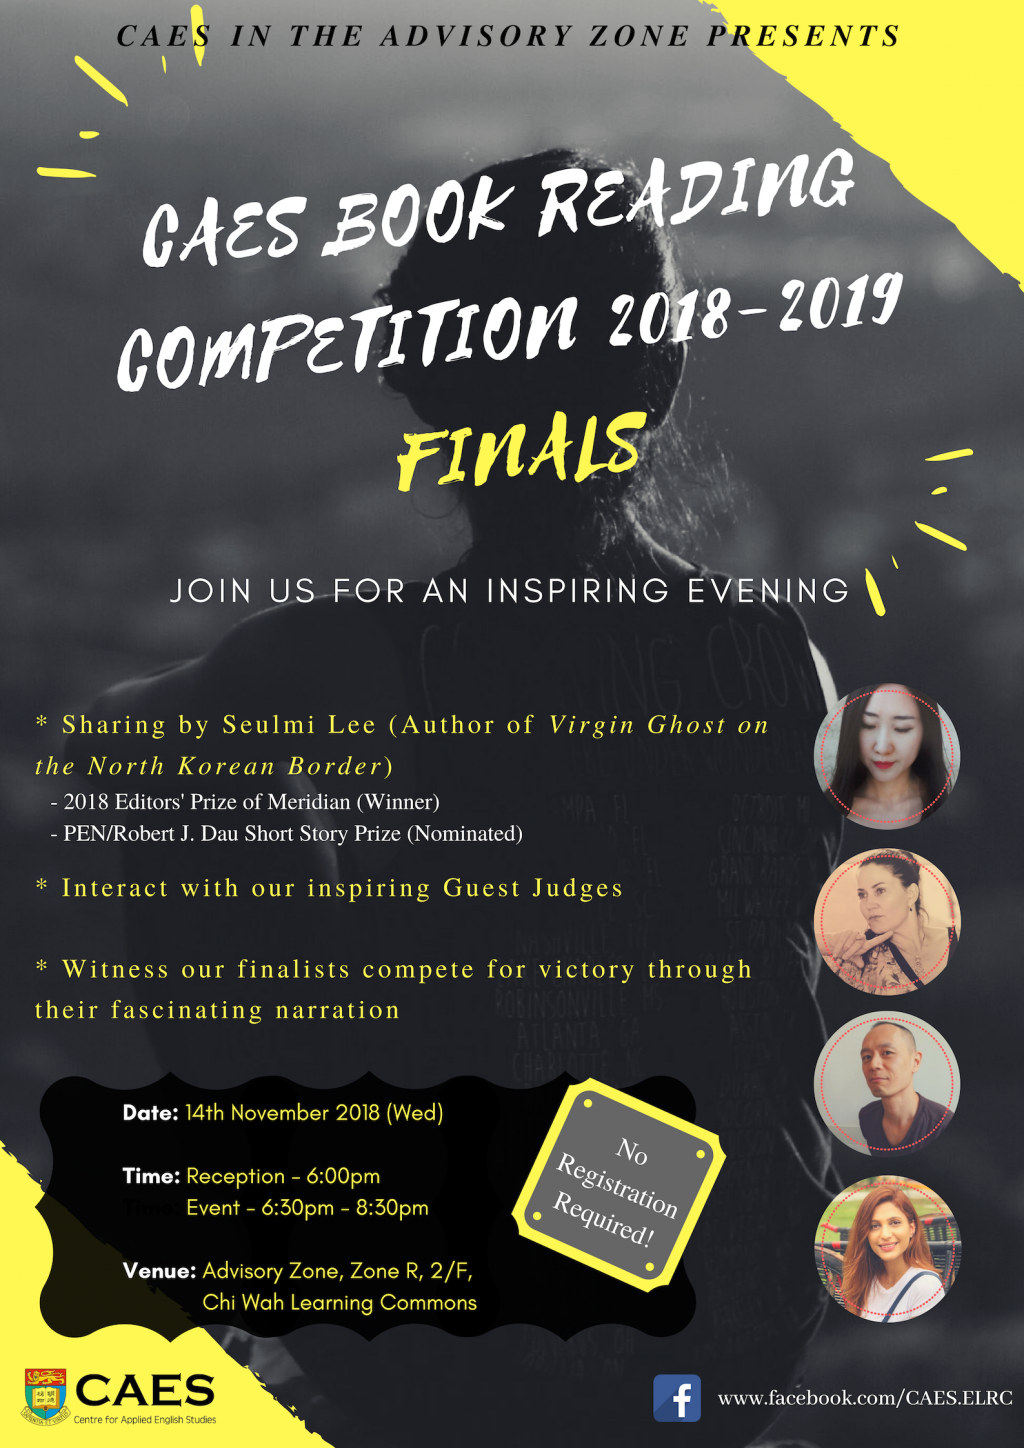 CAES AZ Book Reading Competition Finals